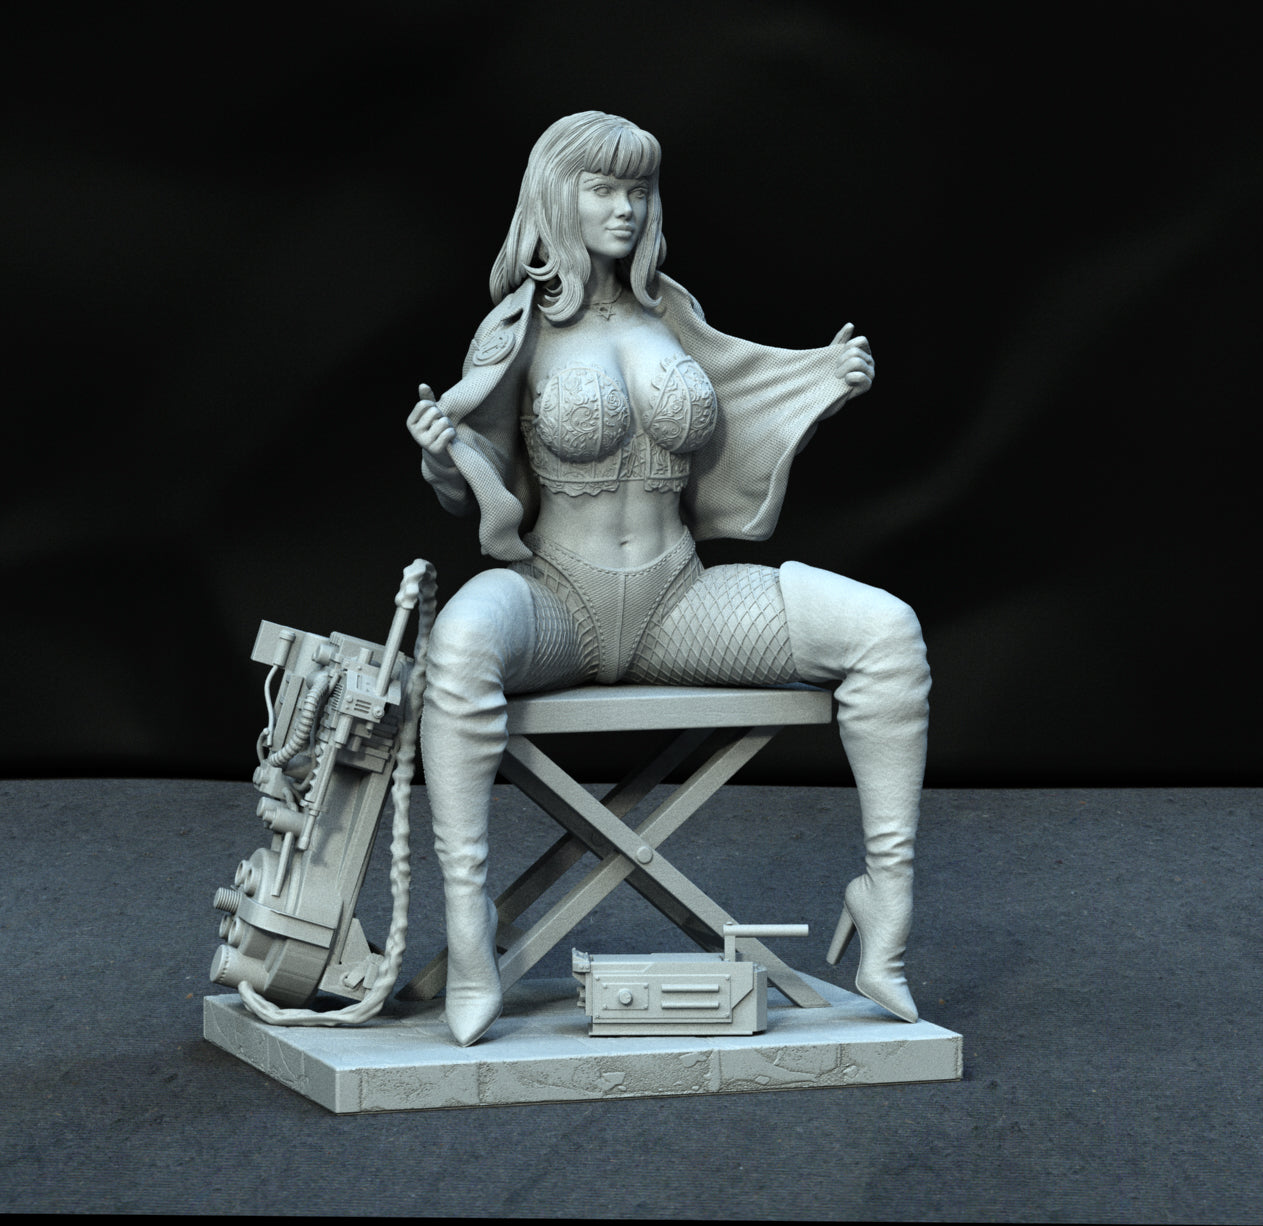 2160 Ghostbusters NSFW Pin Up - STL 3D Print Files